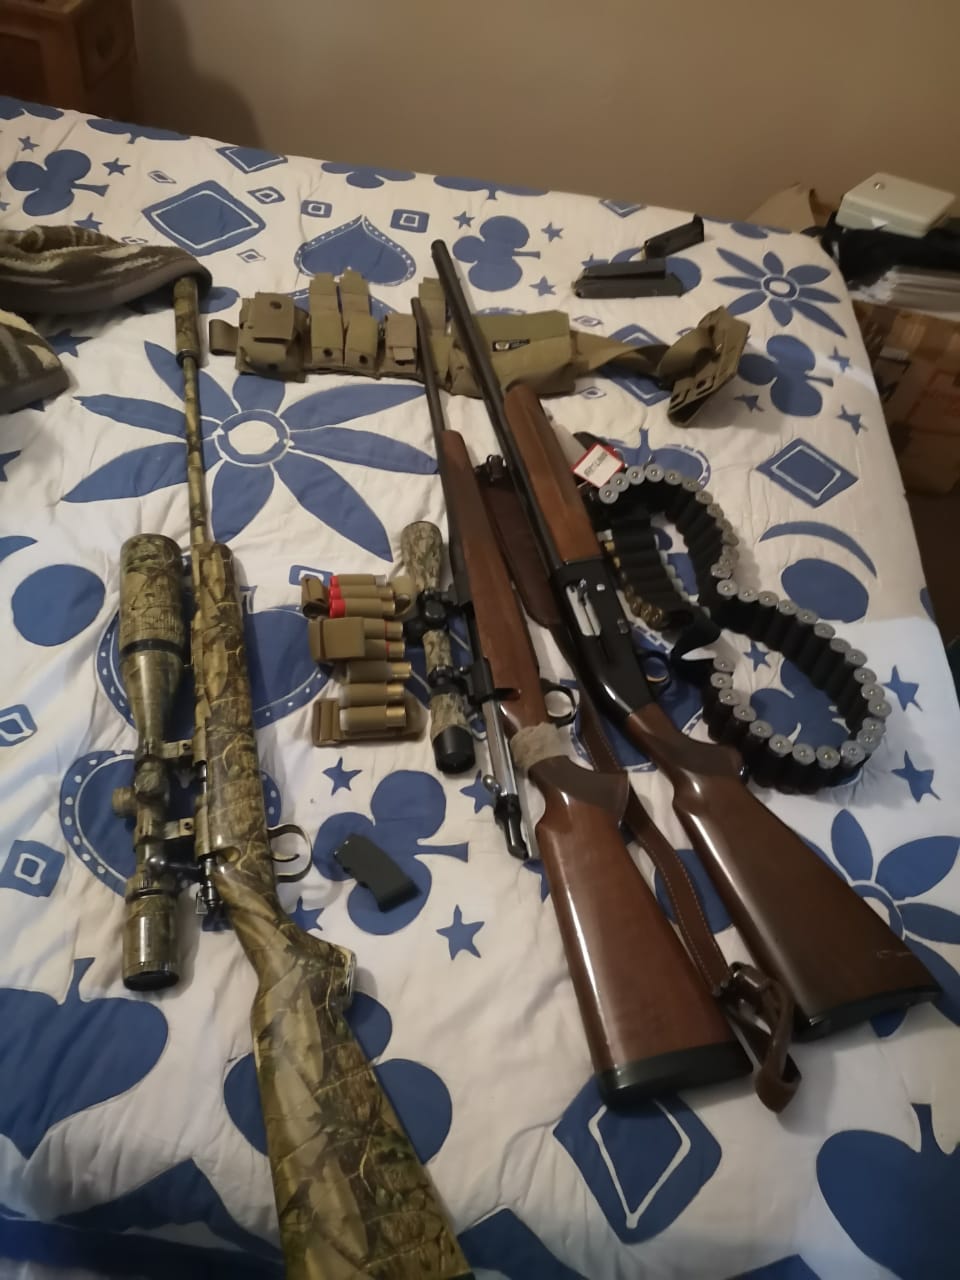 Hawks arrest suspect for illegal possession of firearms and ammunition in Brits